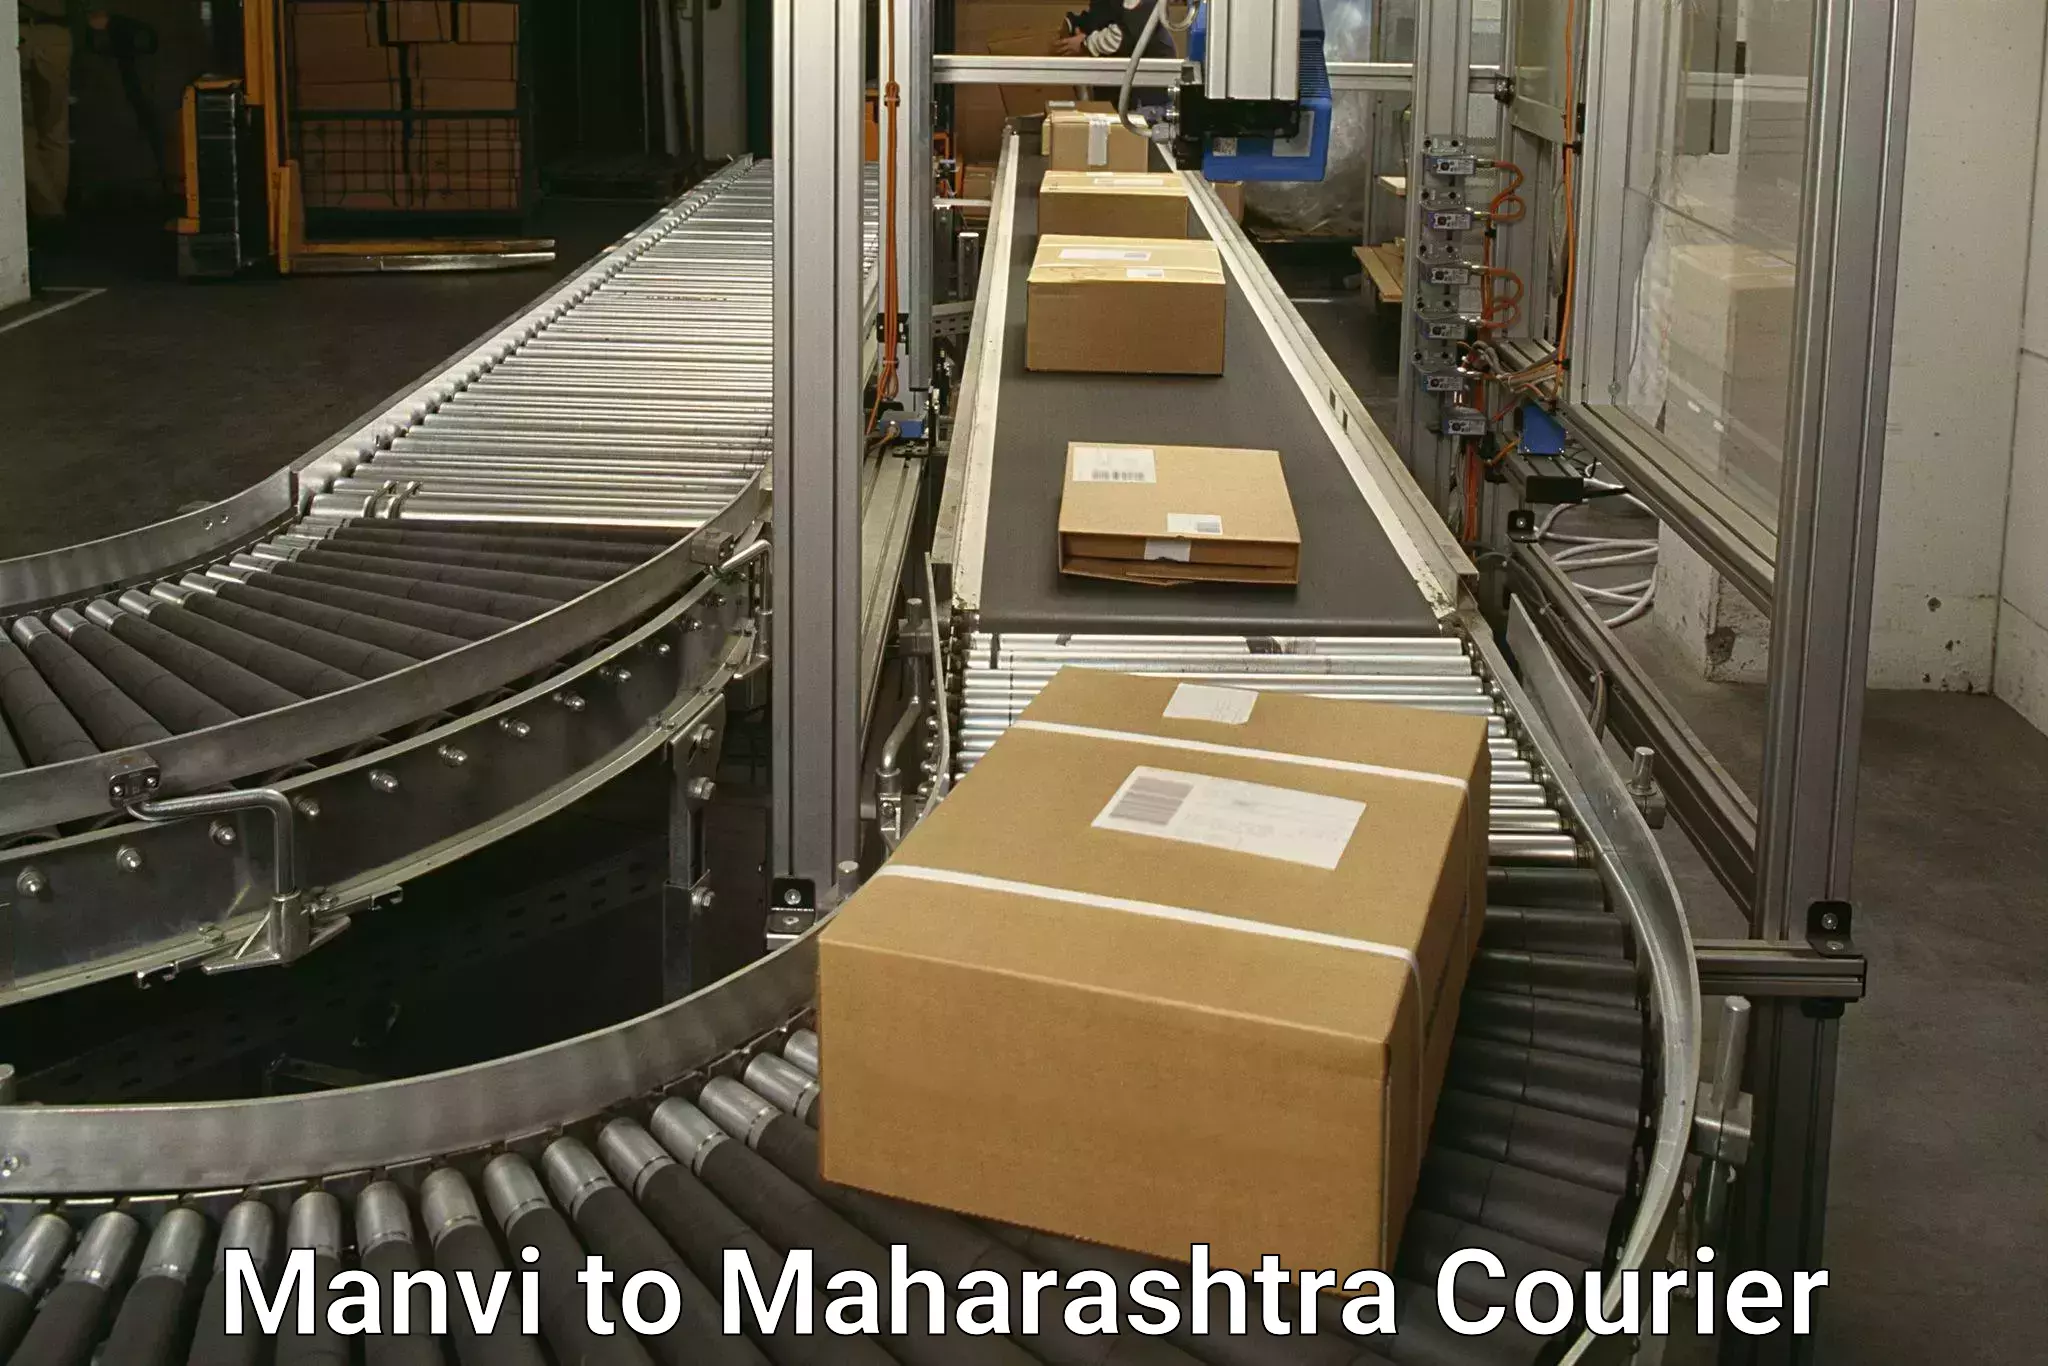 Same-day delivery solutions Manvi to Pune